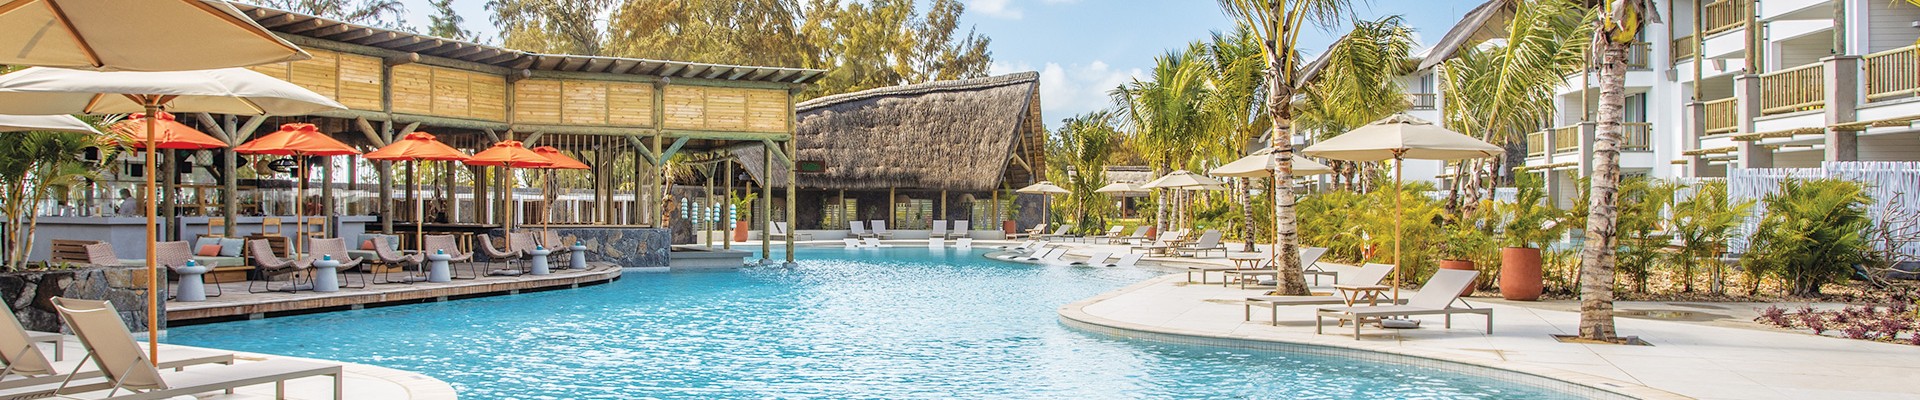 4* Sunrise Attitude (Adult Only) - Mauritius Package (7 nights)